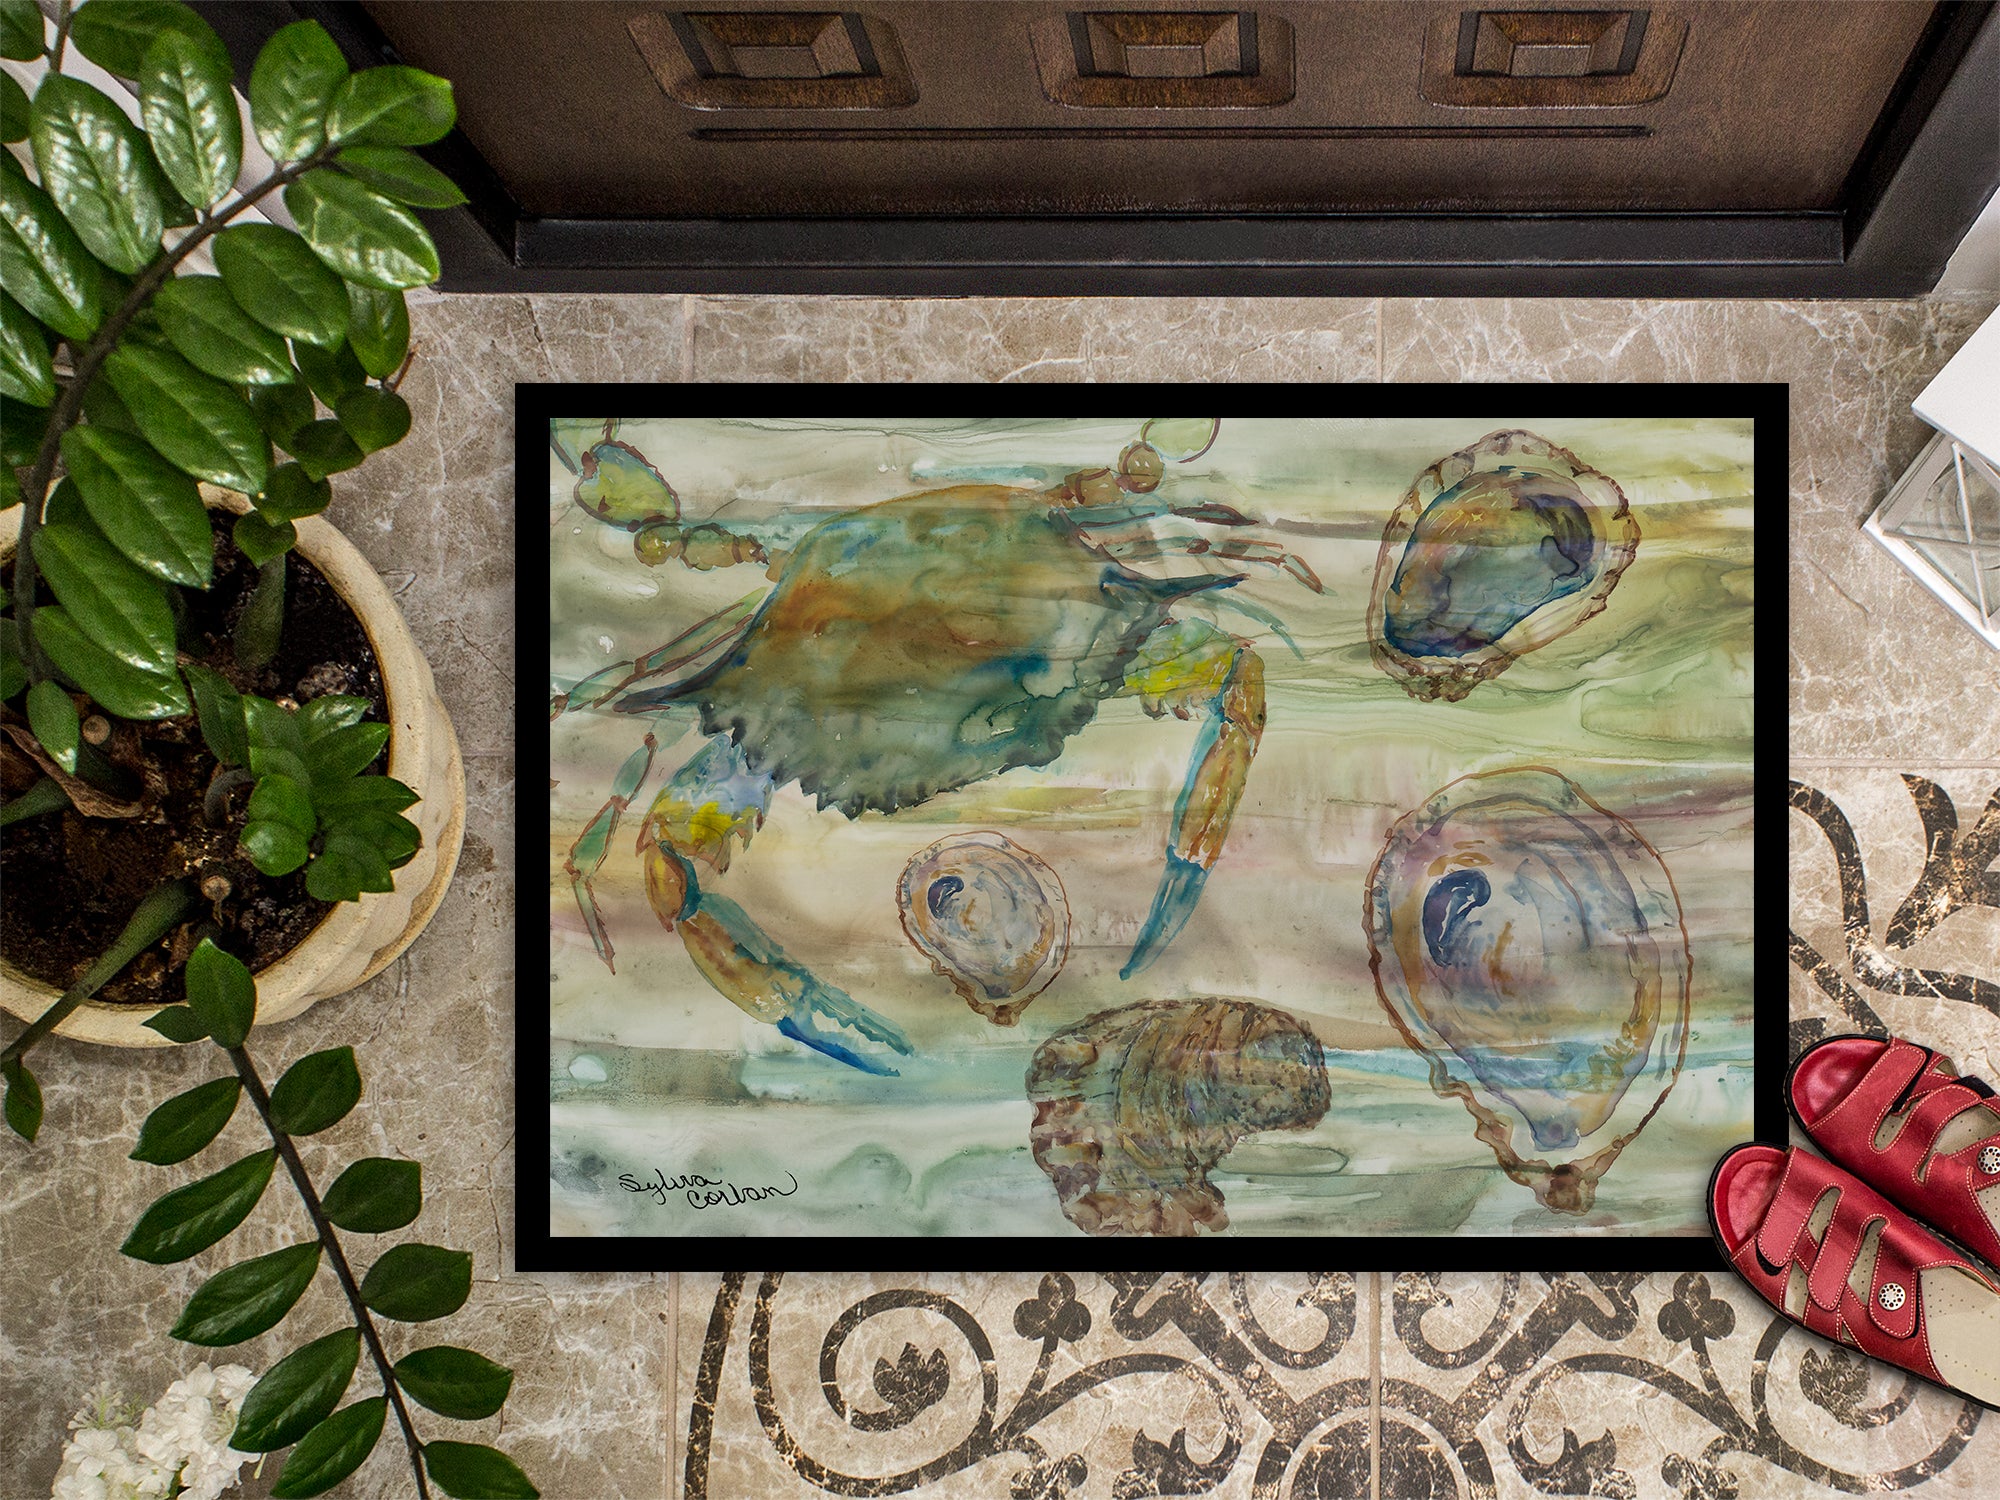 Crab, Shrimp and Oyster Sunset Indoor or Outdoor Mat 18x27 SC2017MAT - the-store.com